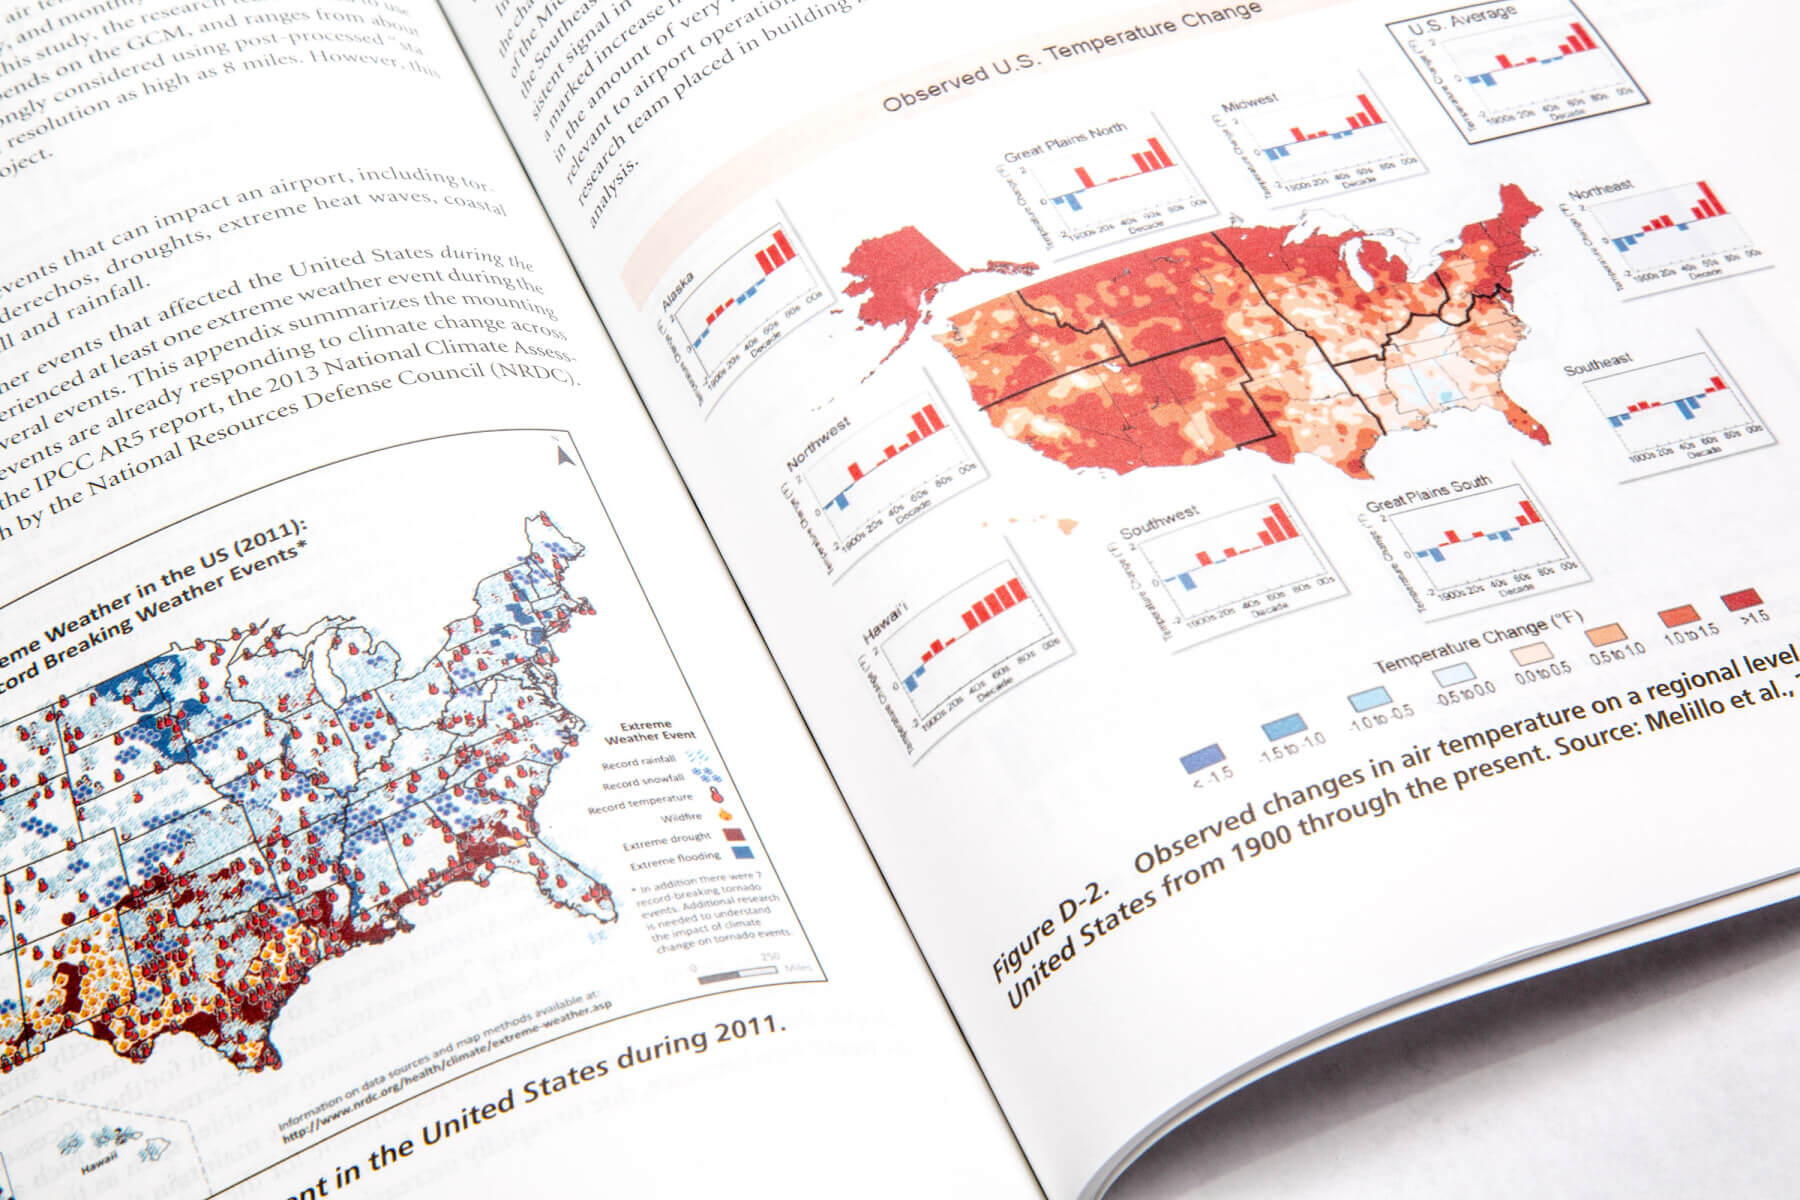 a close up of a page inside ACRP research report 147 with maps of the US showing temperature change